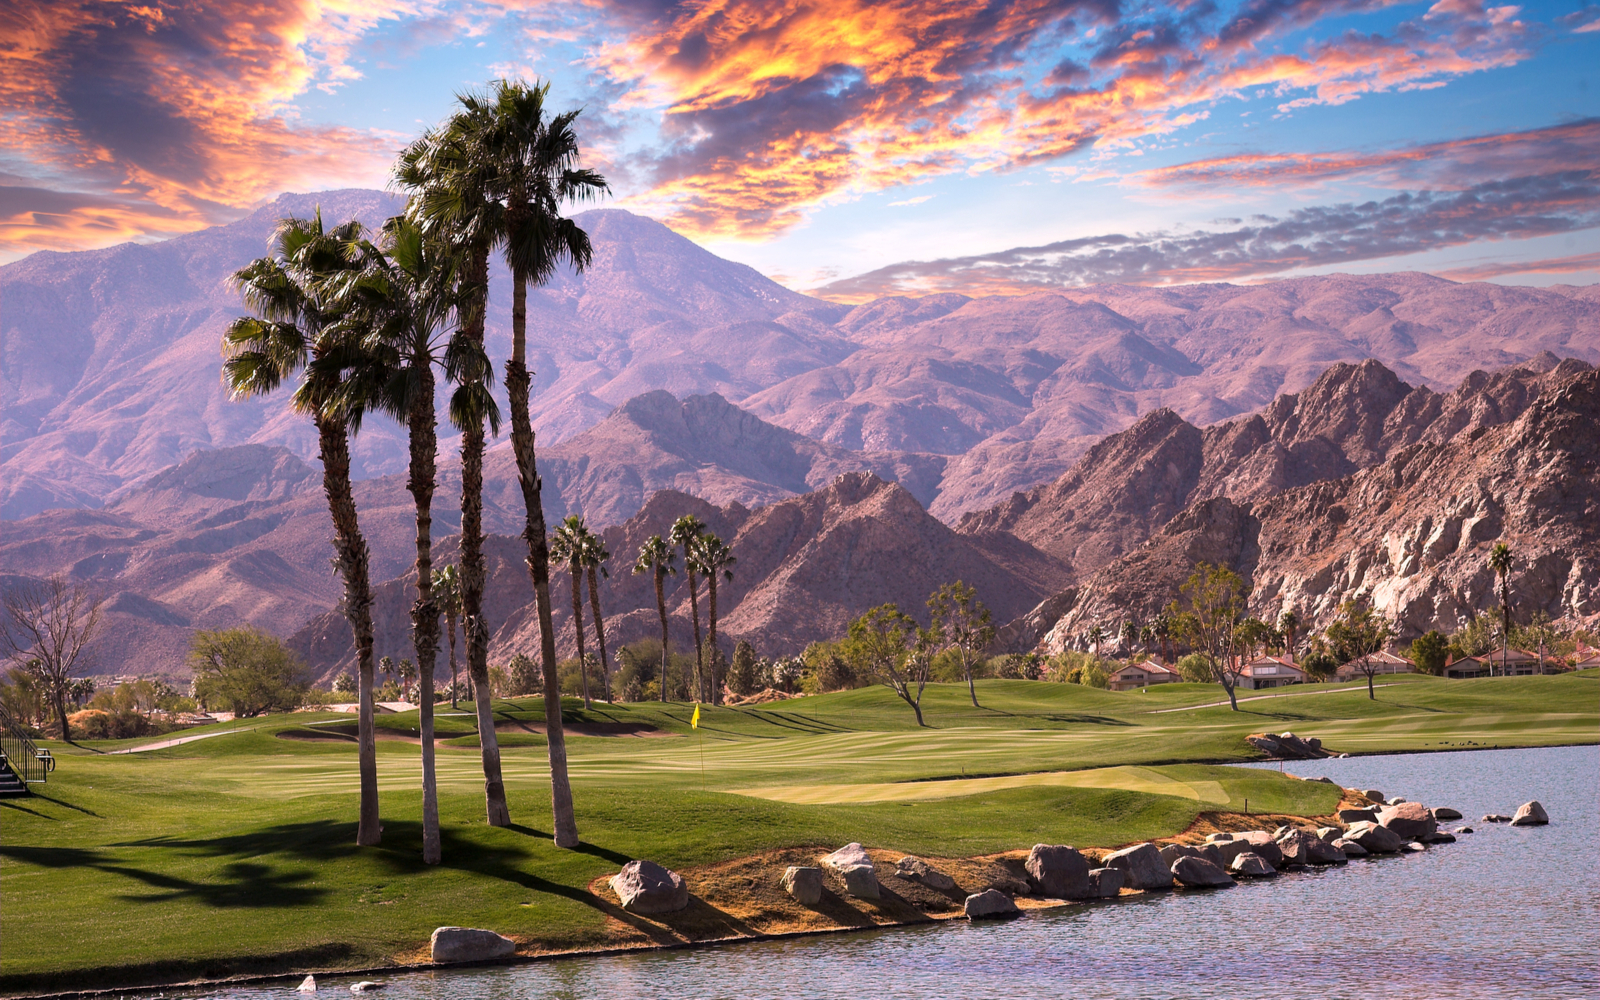 Gorgeous view of a sunset over one of the best hotels in Palm Springs and a golf course